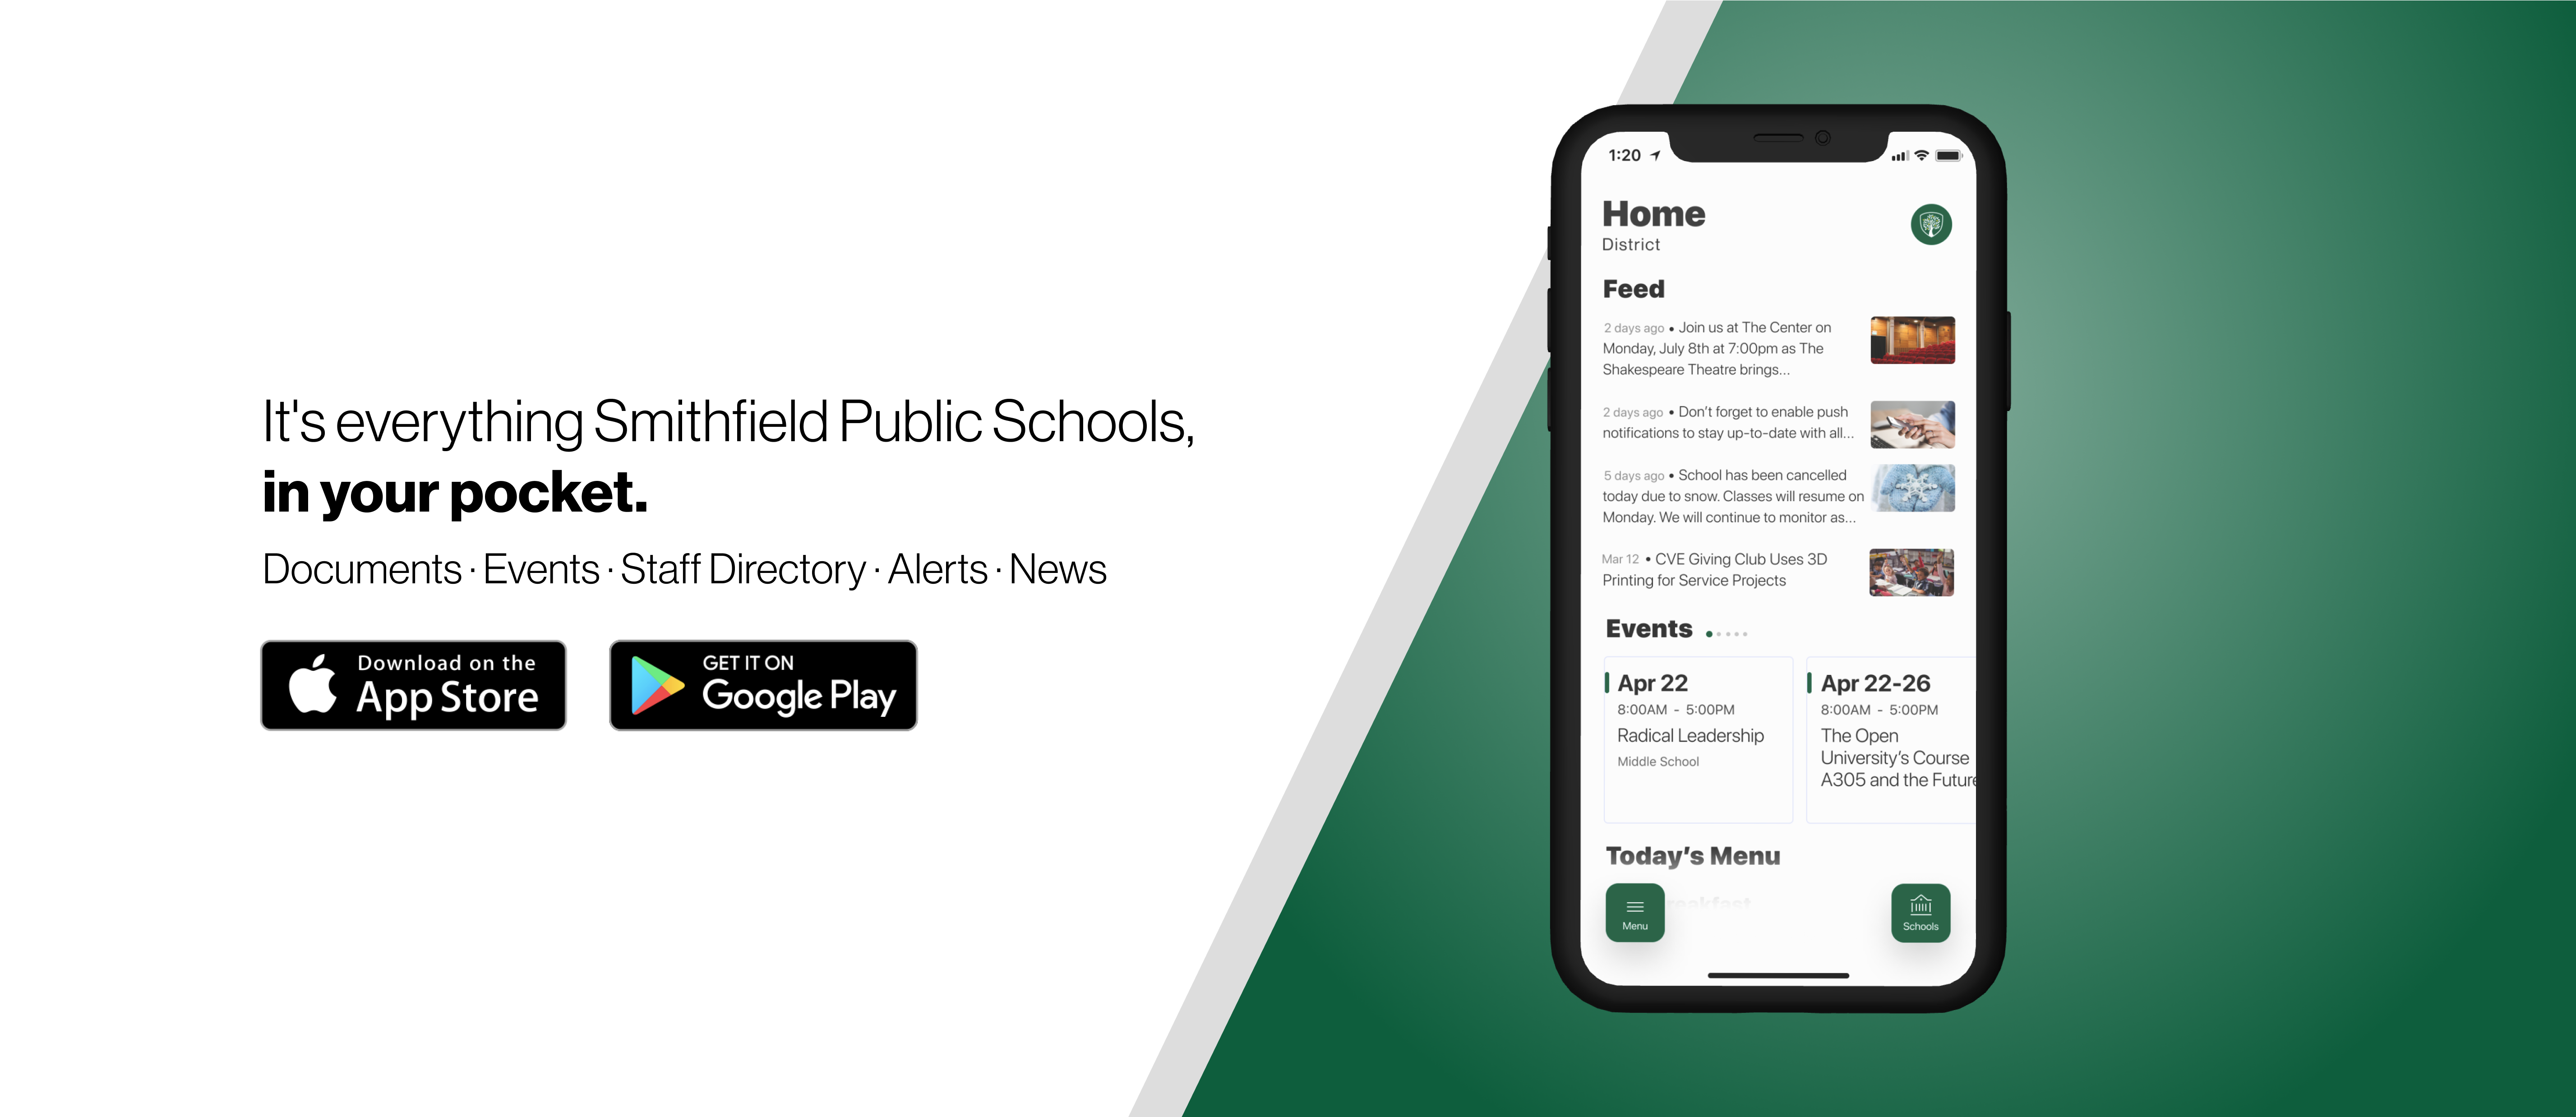 It's everything Smithfield Public Schools, in your pocket. Documents- Events- Staff Directory- Alerts-News- App Store and Google Play 